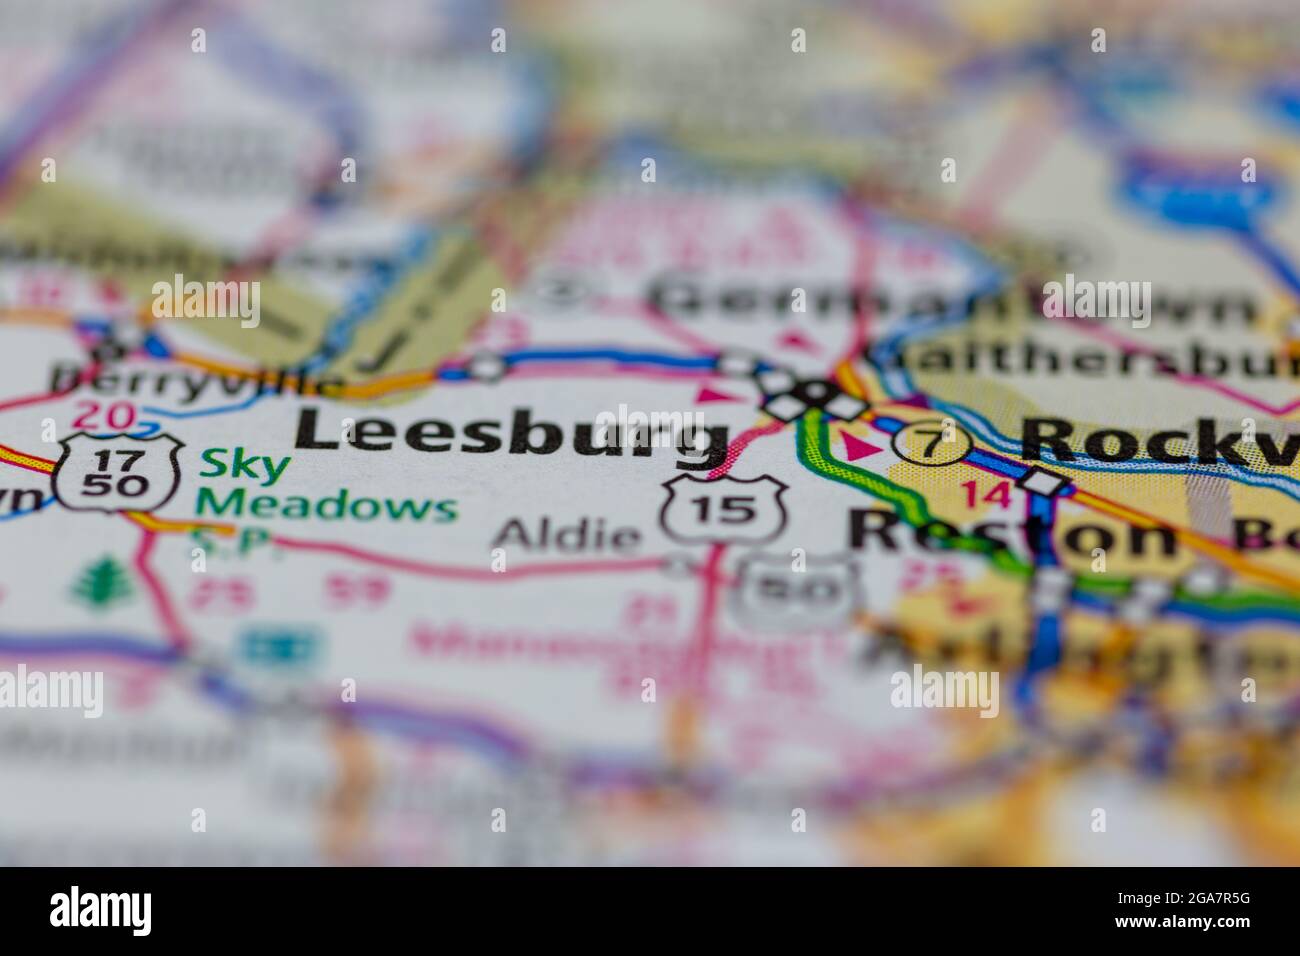 Leesburg Virginia shown on a road map or Geography map Stock Photo